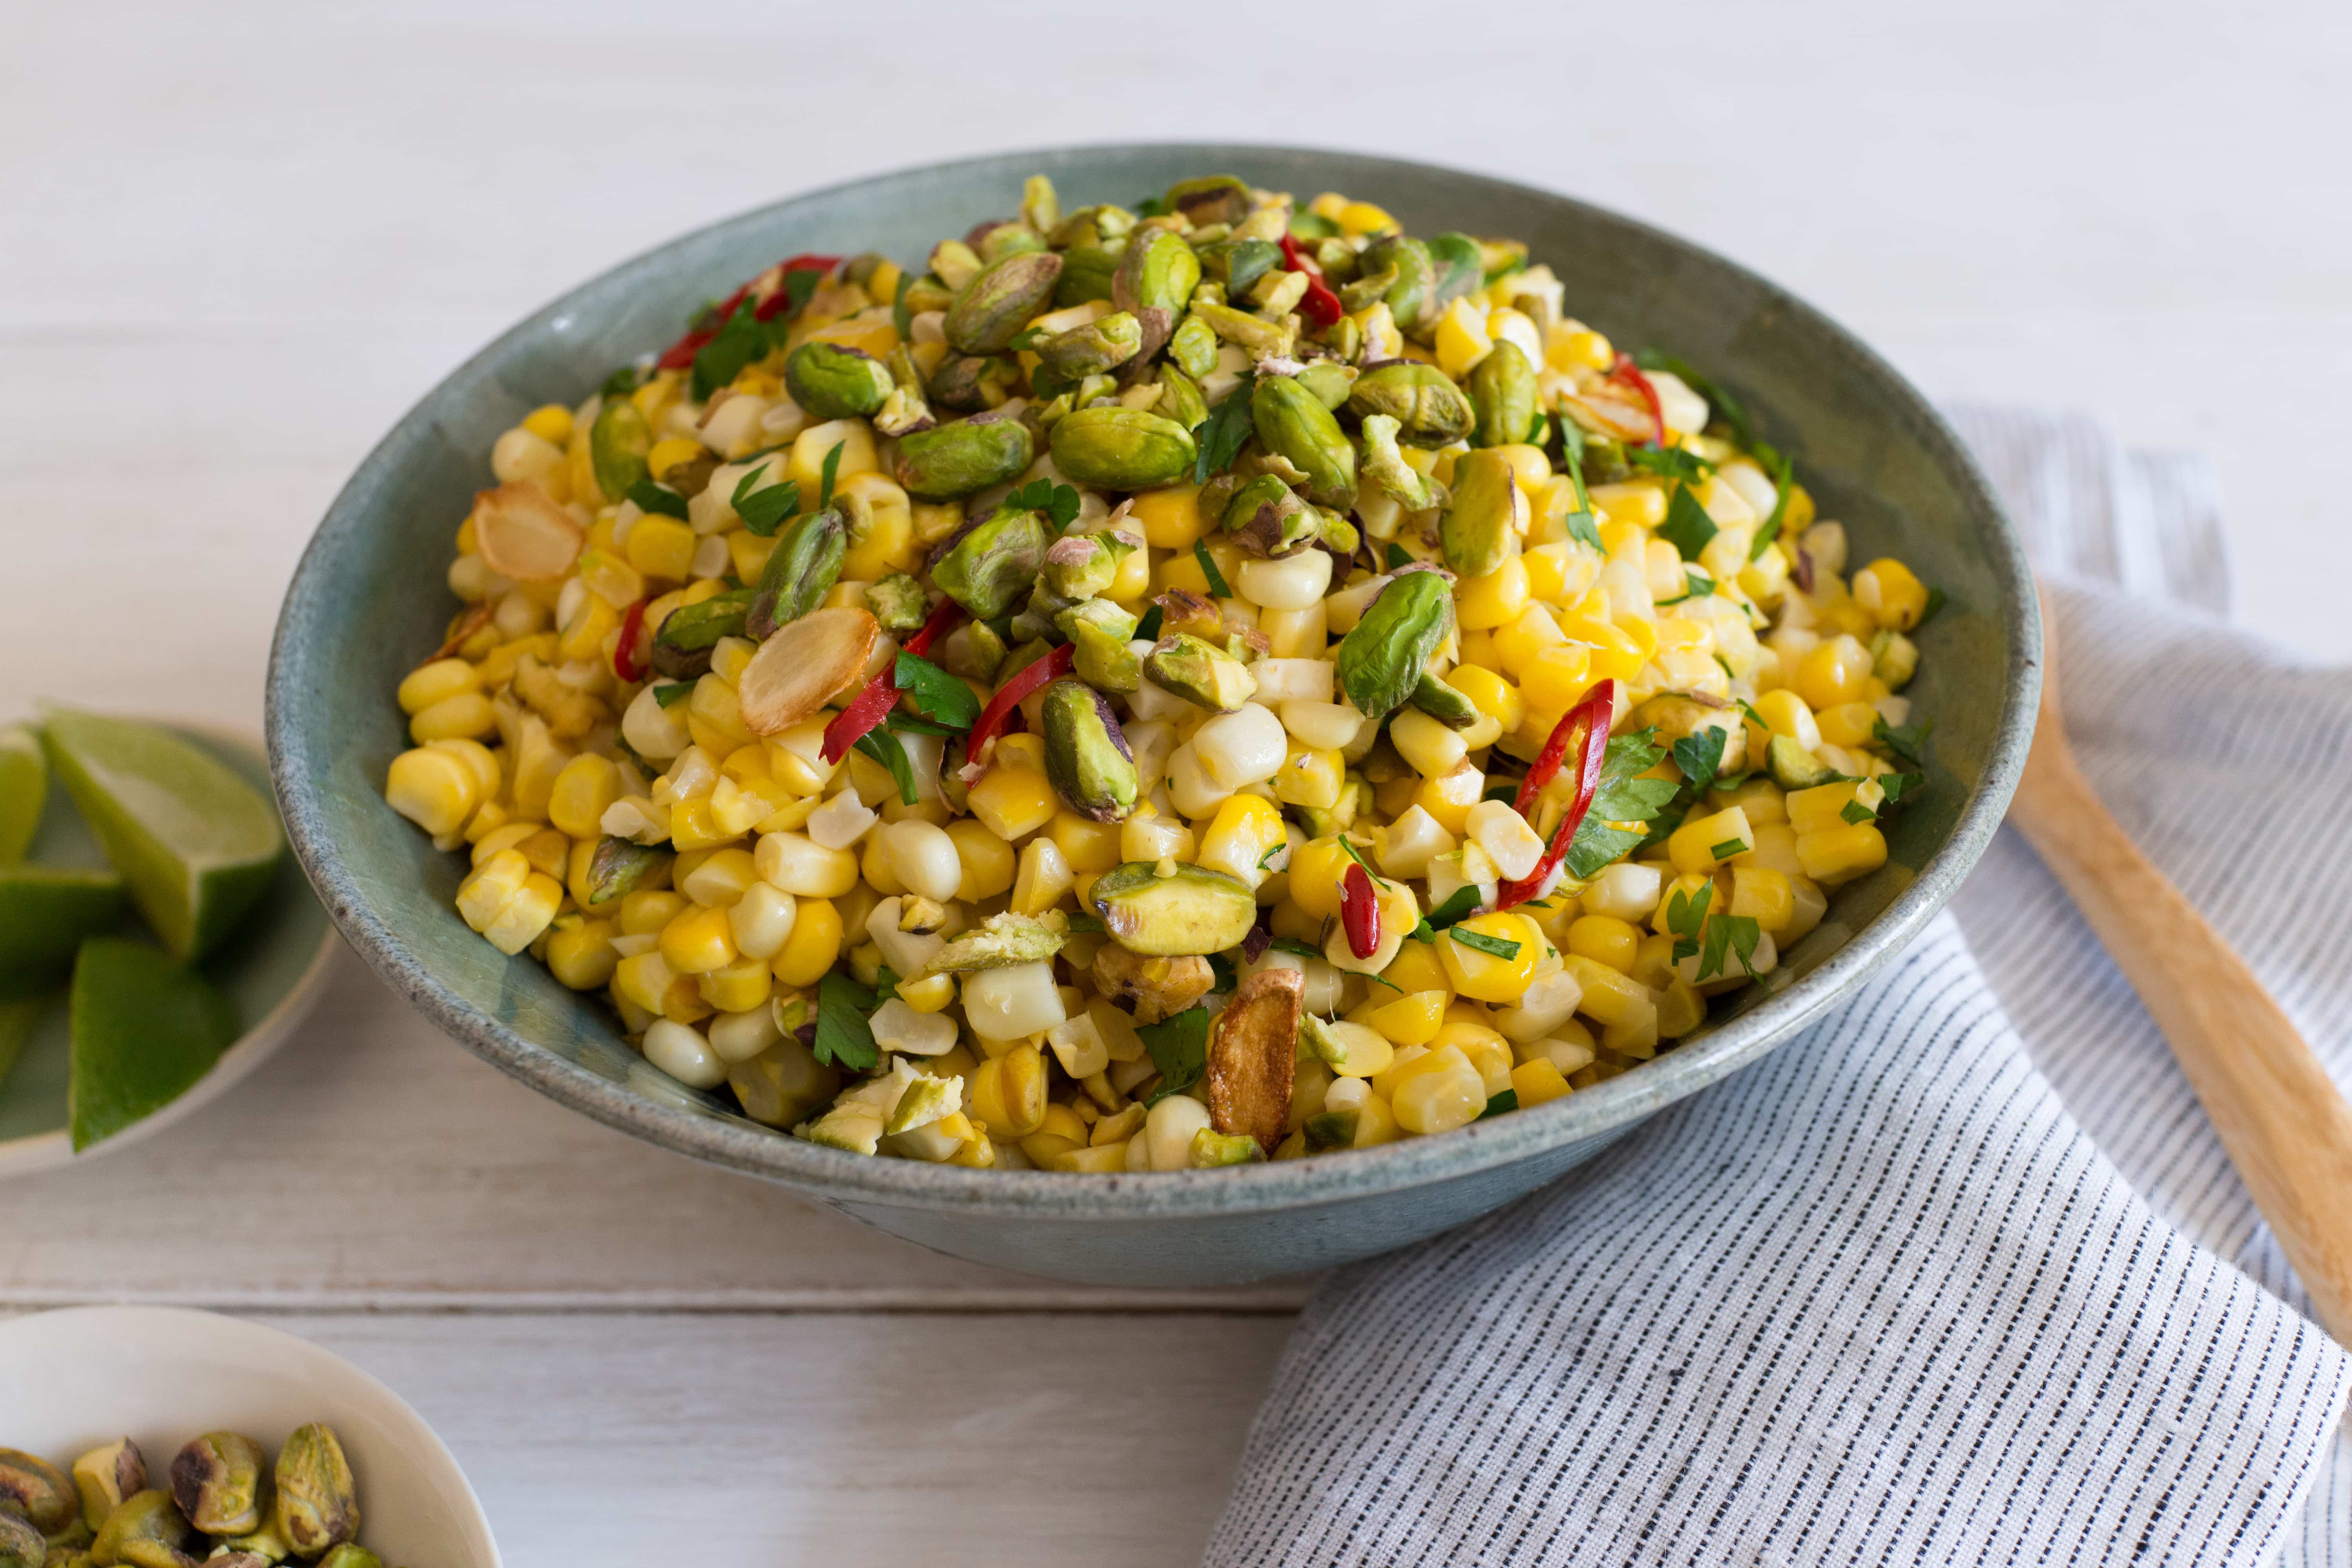 Links to Sweet Corn with Wonderful Pistachios recipe